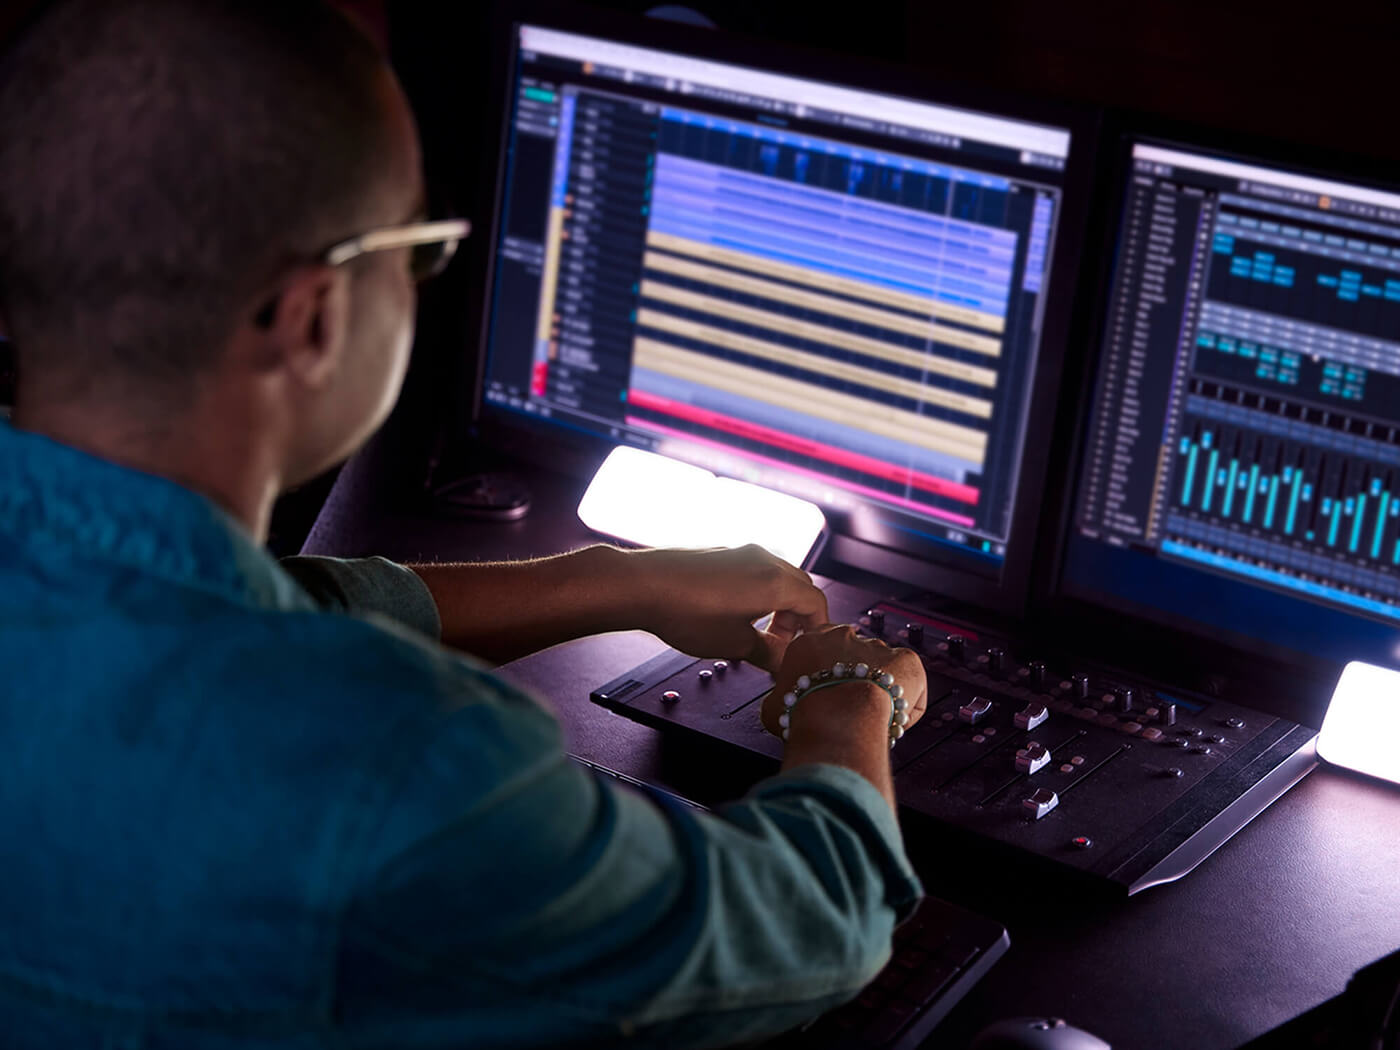 Producer working in a music studio, photo by wundervisuals via Getty Images